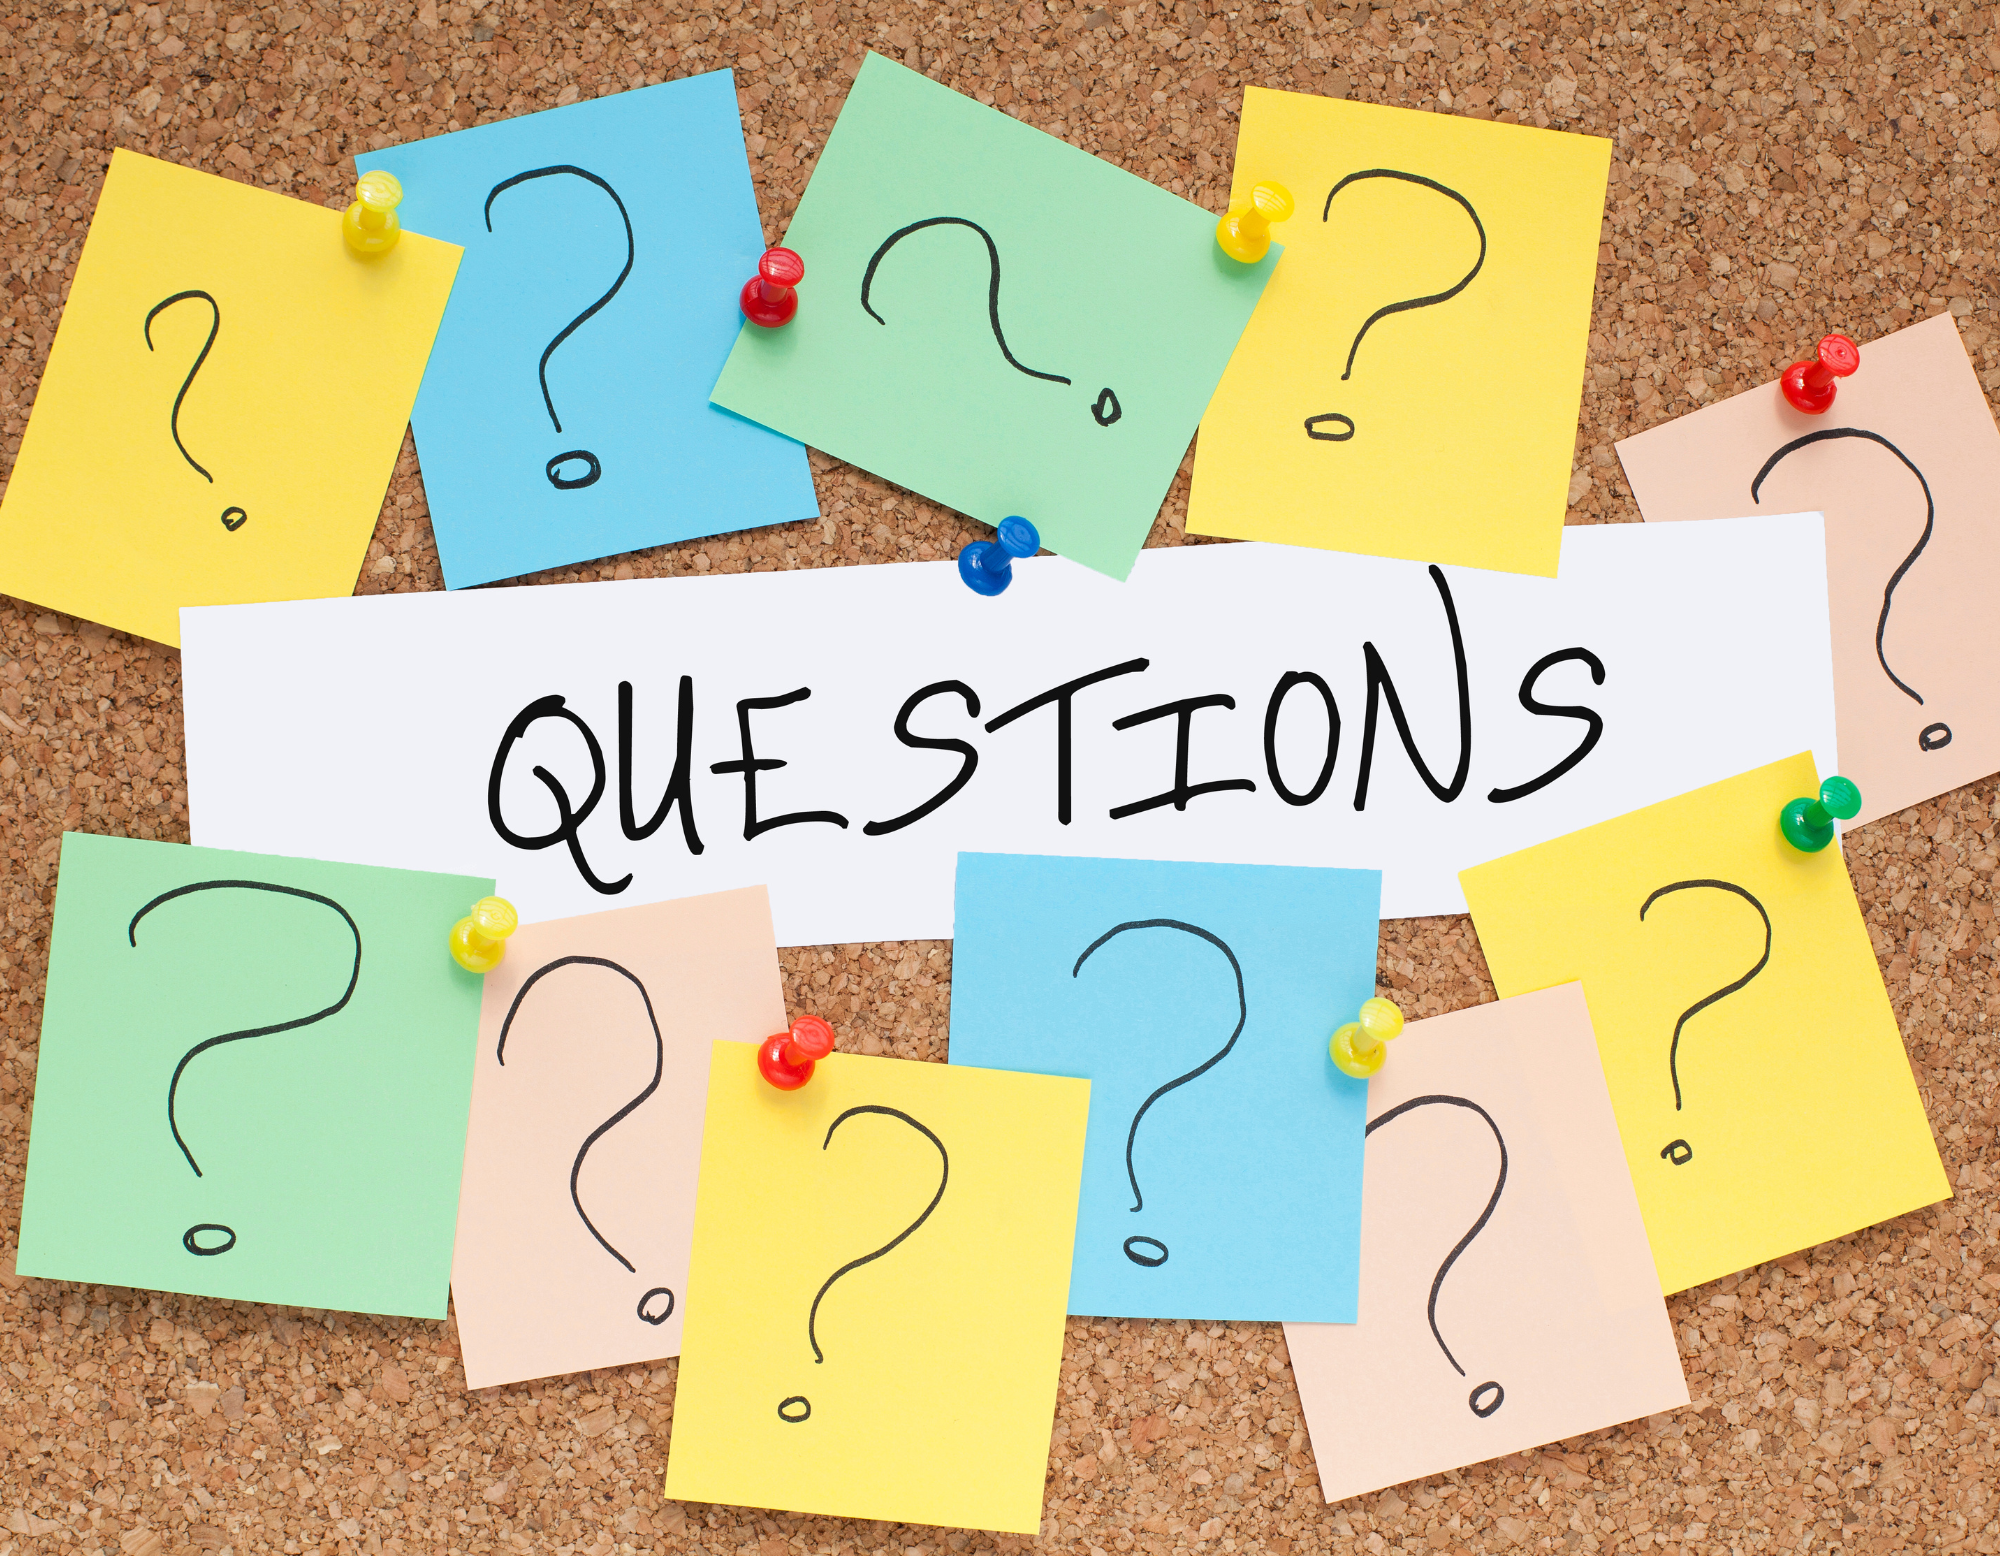 The word "Questions" on a bulletin board surrounded by sticky notes with questions marks drawn on them